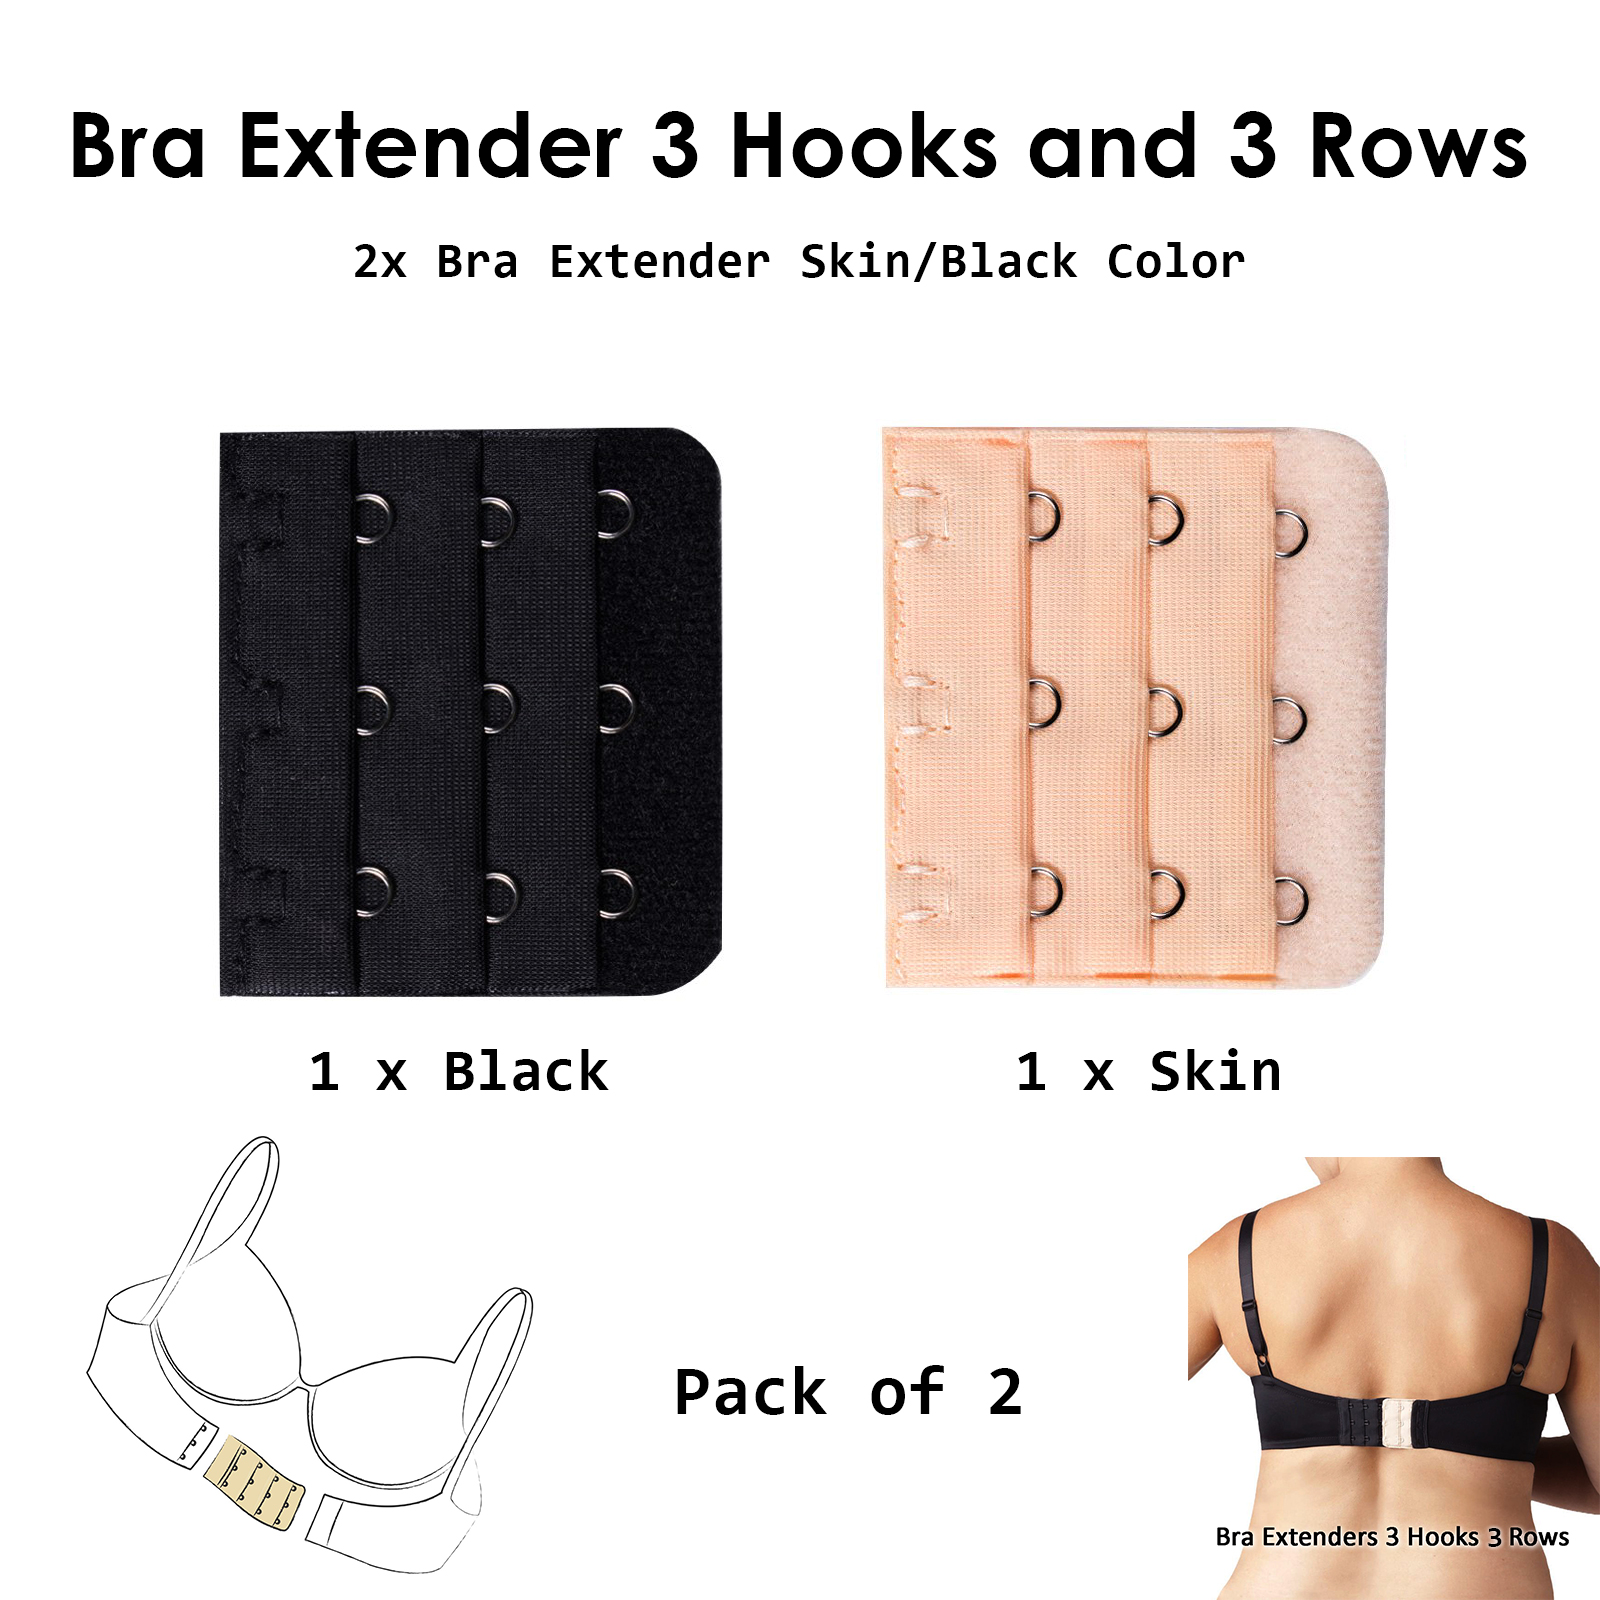 Pack of 2 Bra Extenders 3-Hooks 3-Rows Increase 0.5 to 2 inches to